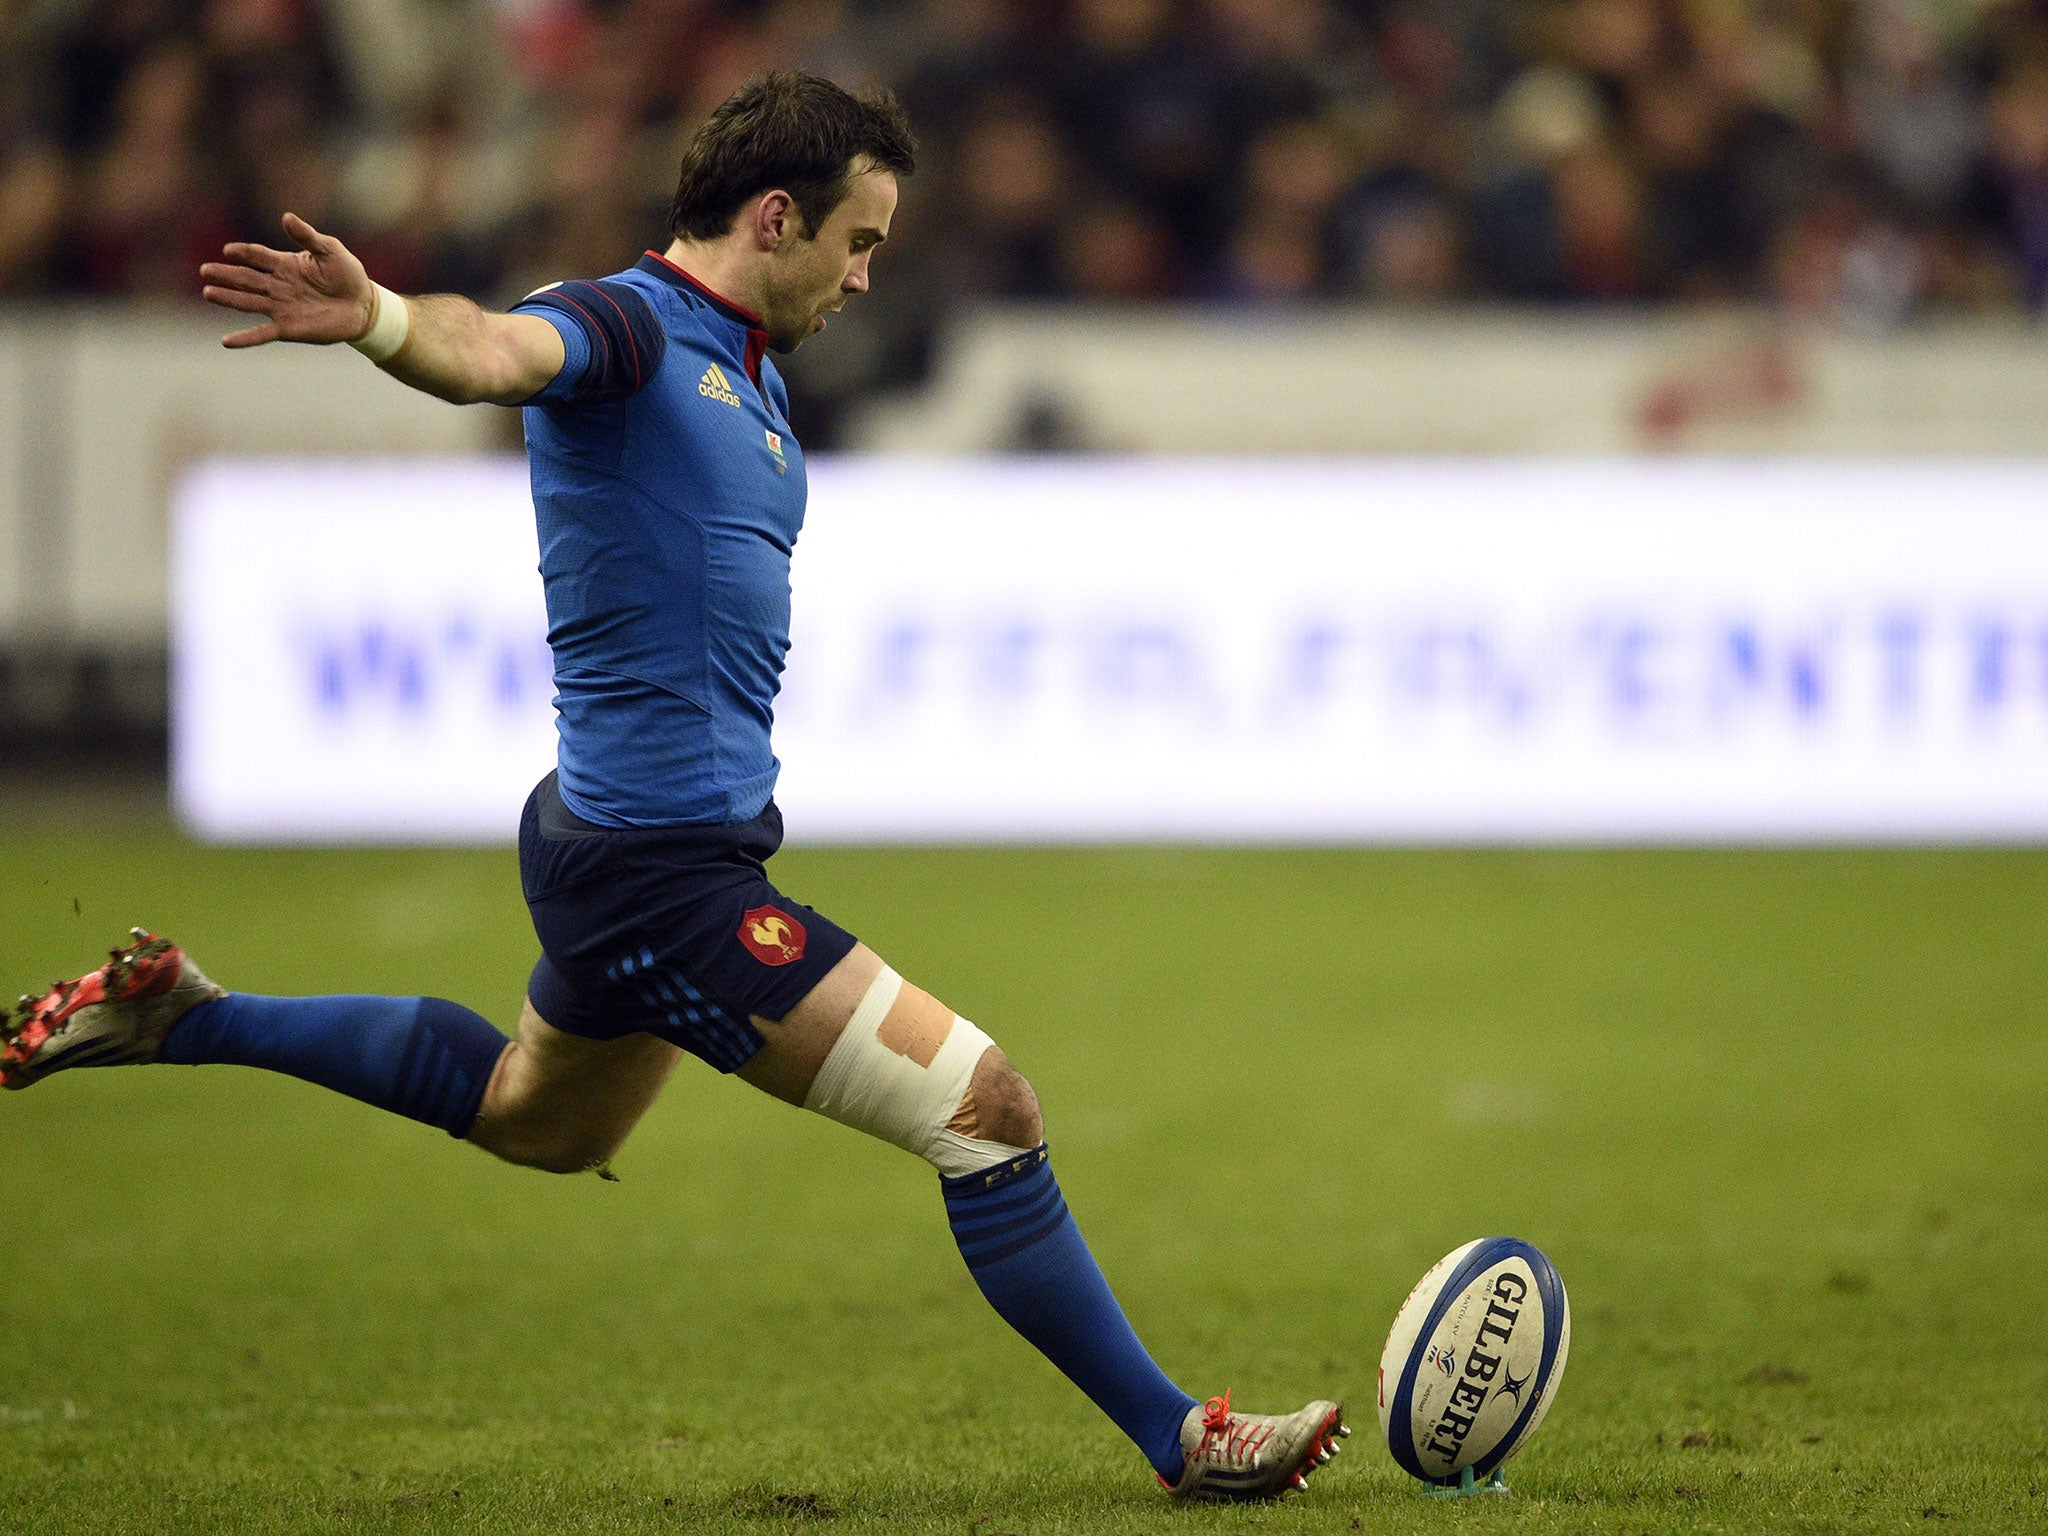 Morgan Parra kept France in touch until they conceded a try